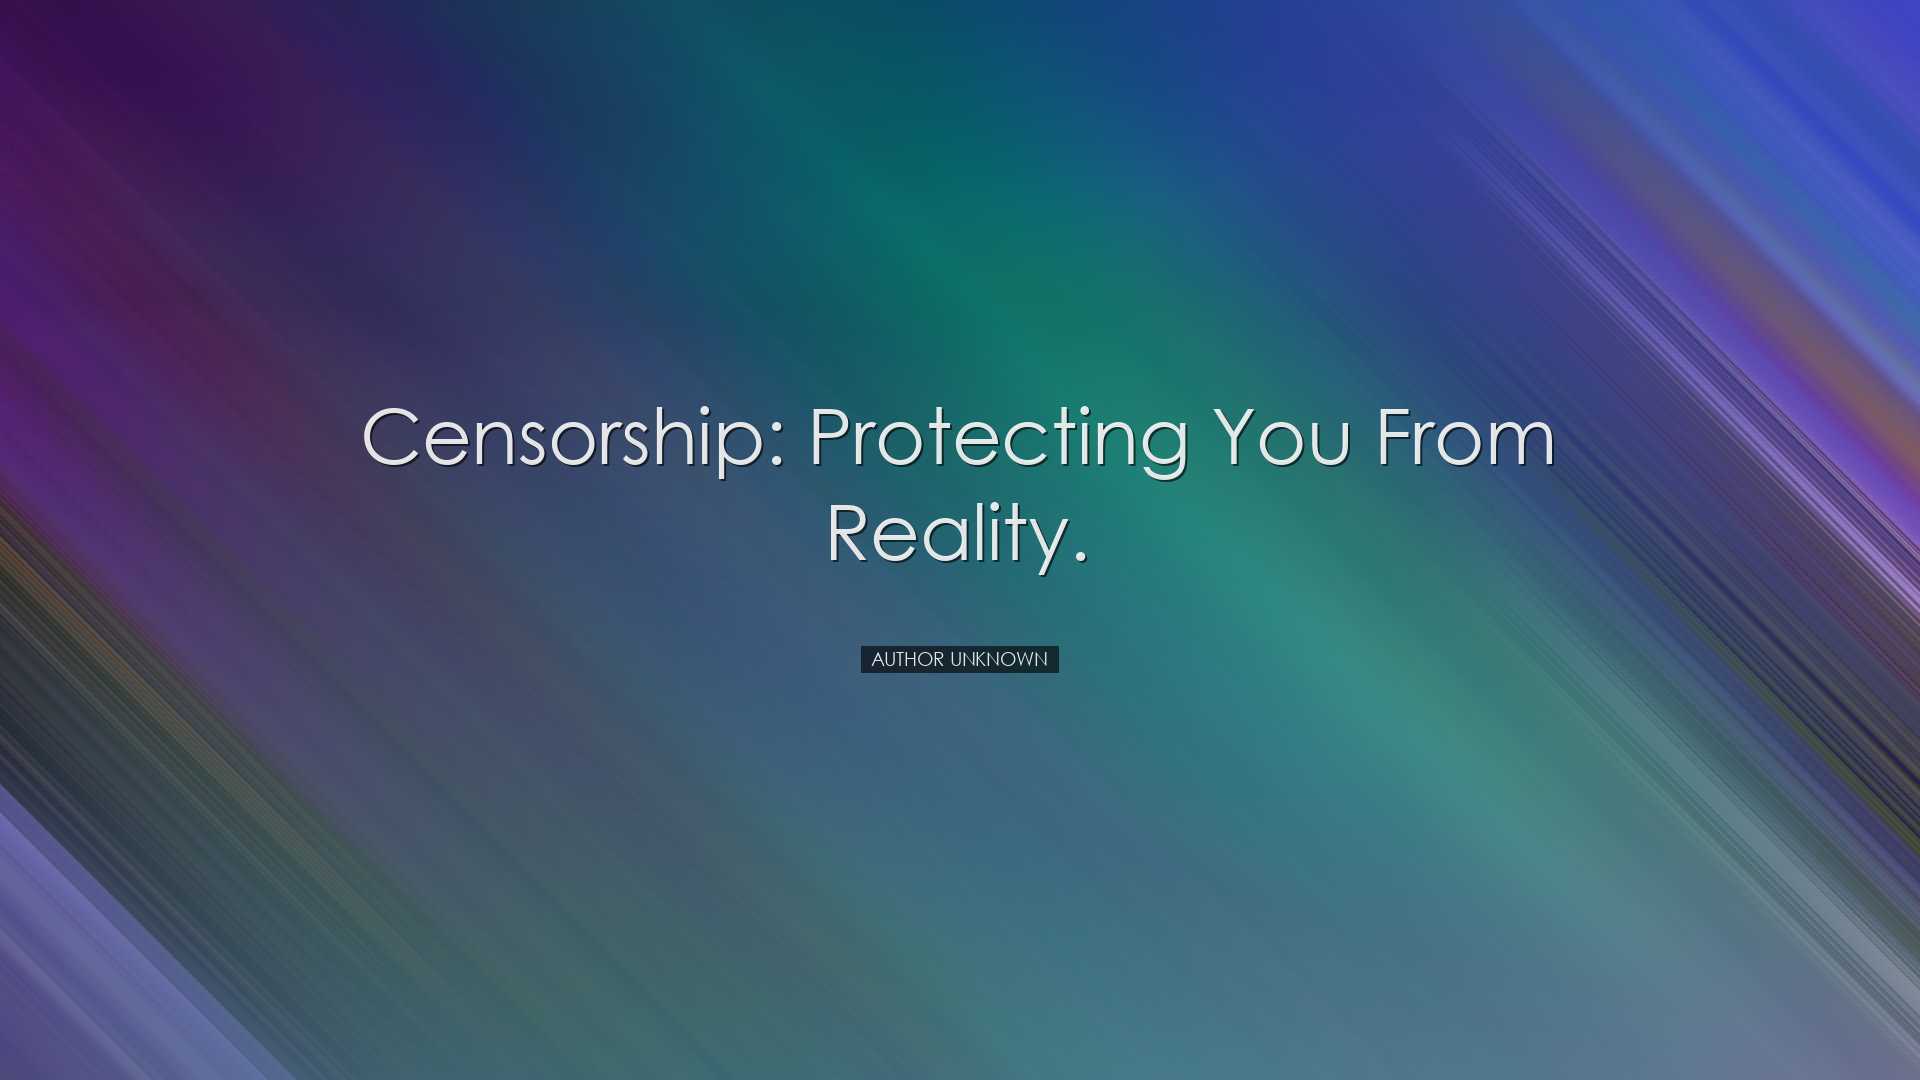 Censorship: protecting you from reality. - Author unknown